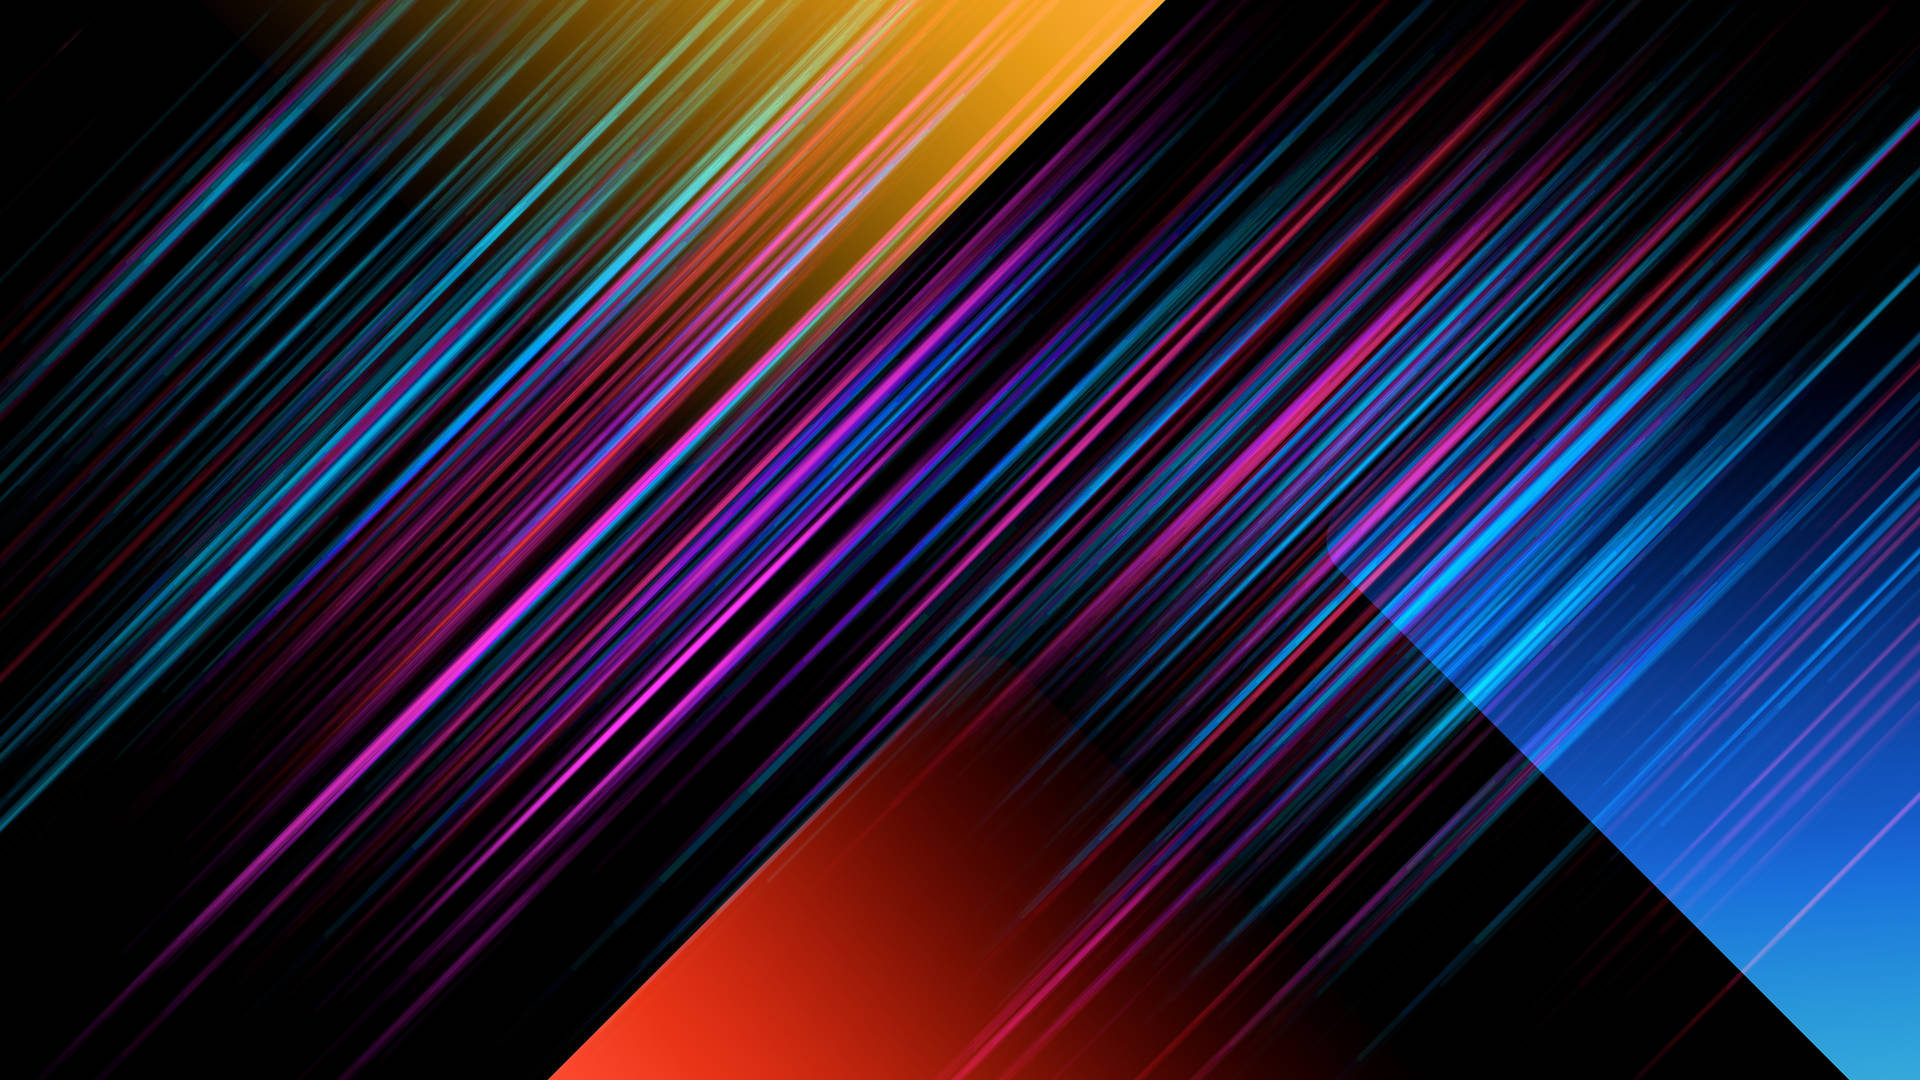 Download 8k Ultra Hd Colorful Lines And Shapes Wallpaper 